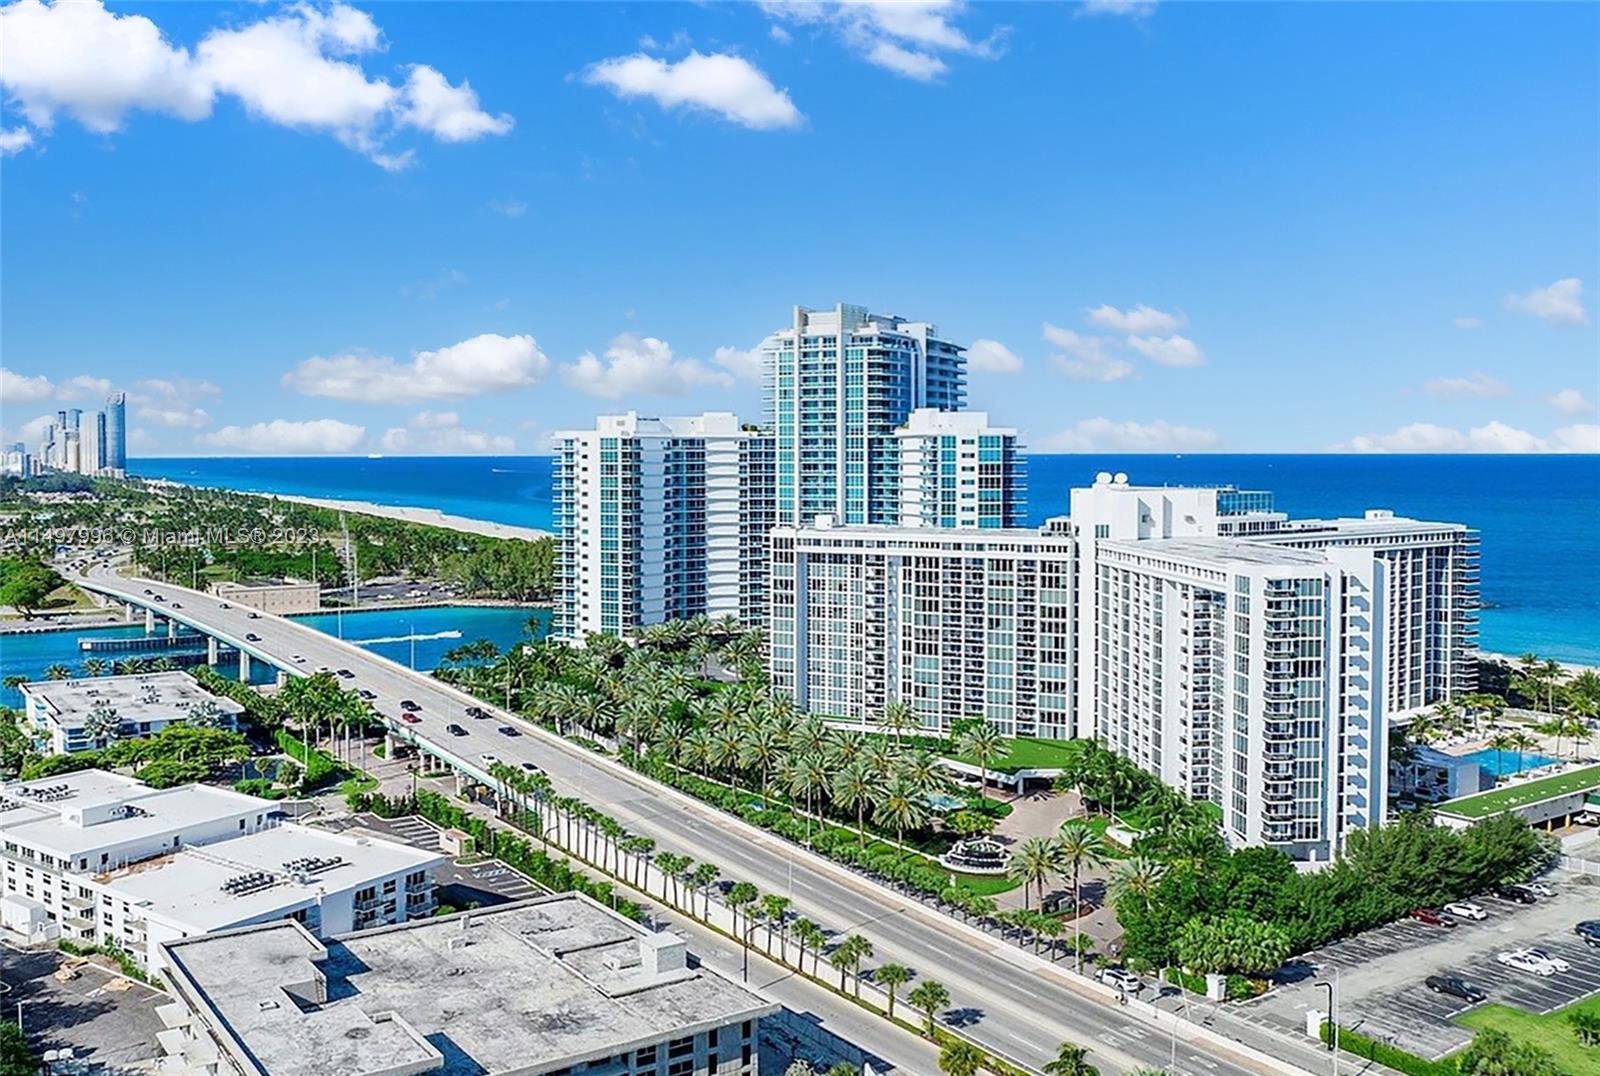 Photo of 10275 Collins Ave #217 in Bal Harbour, FL